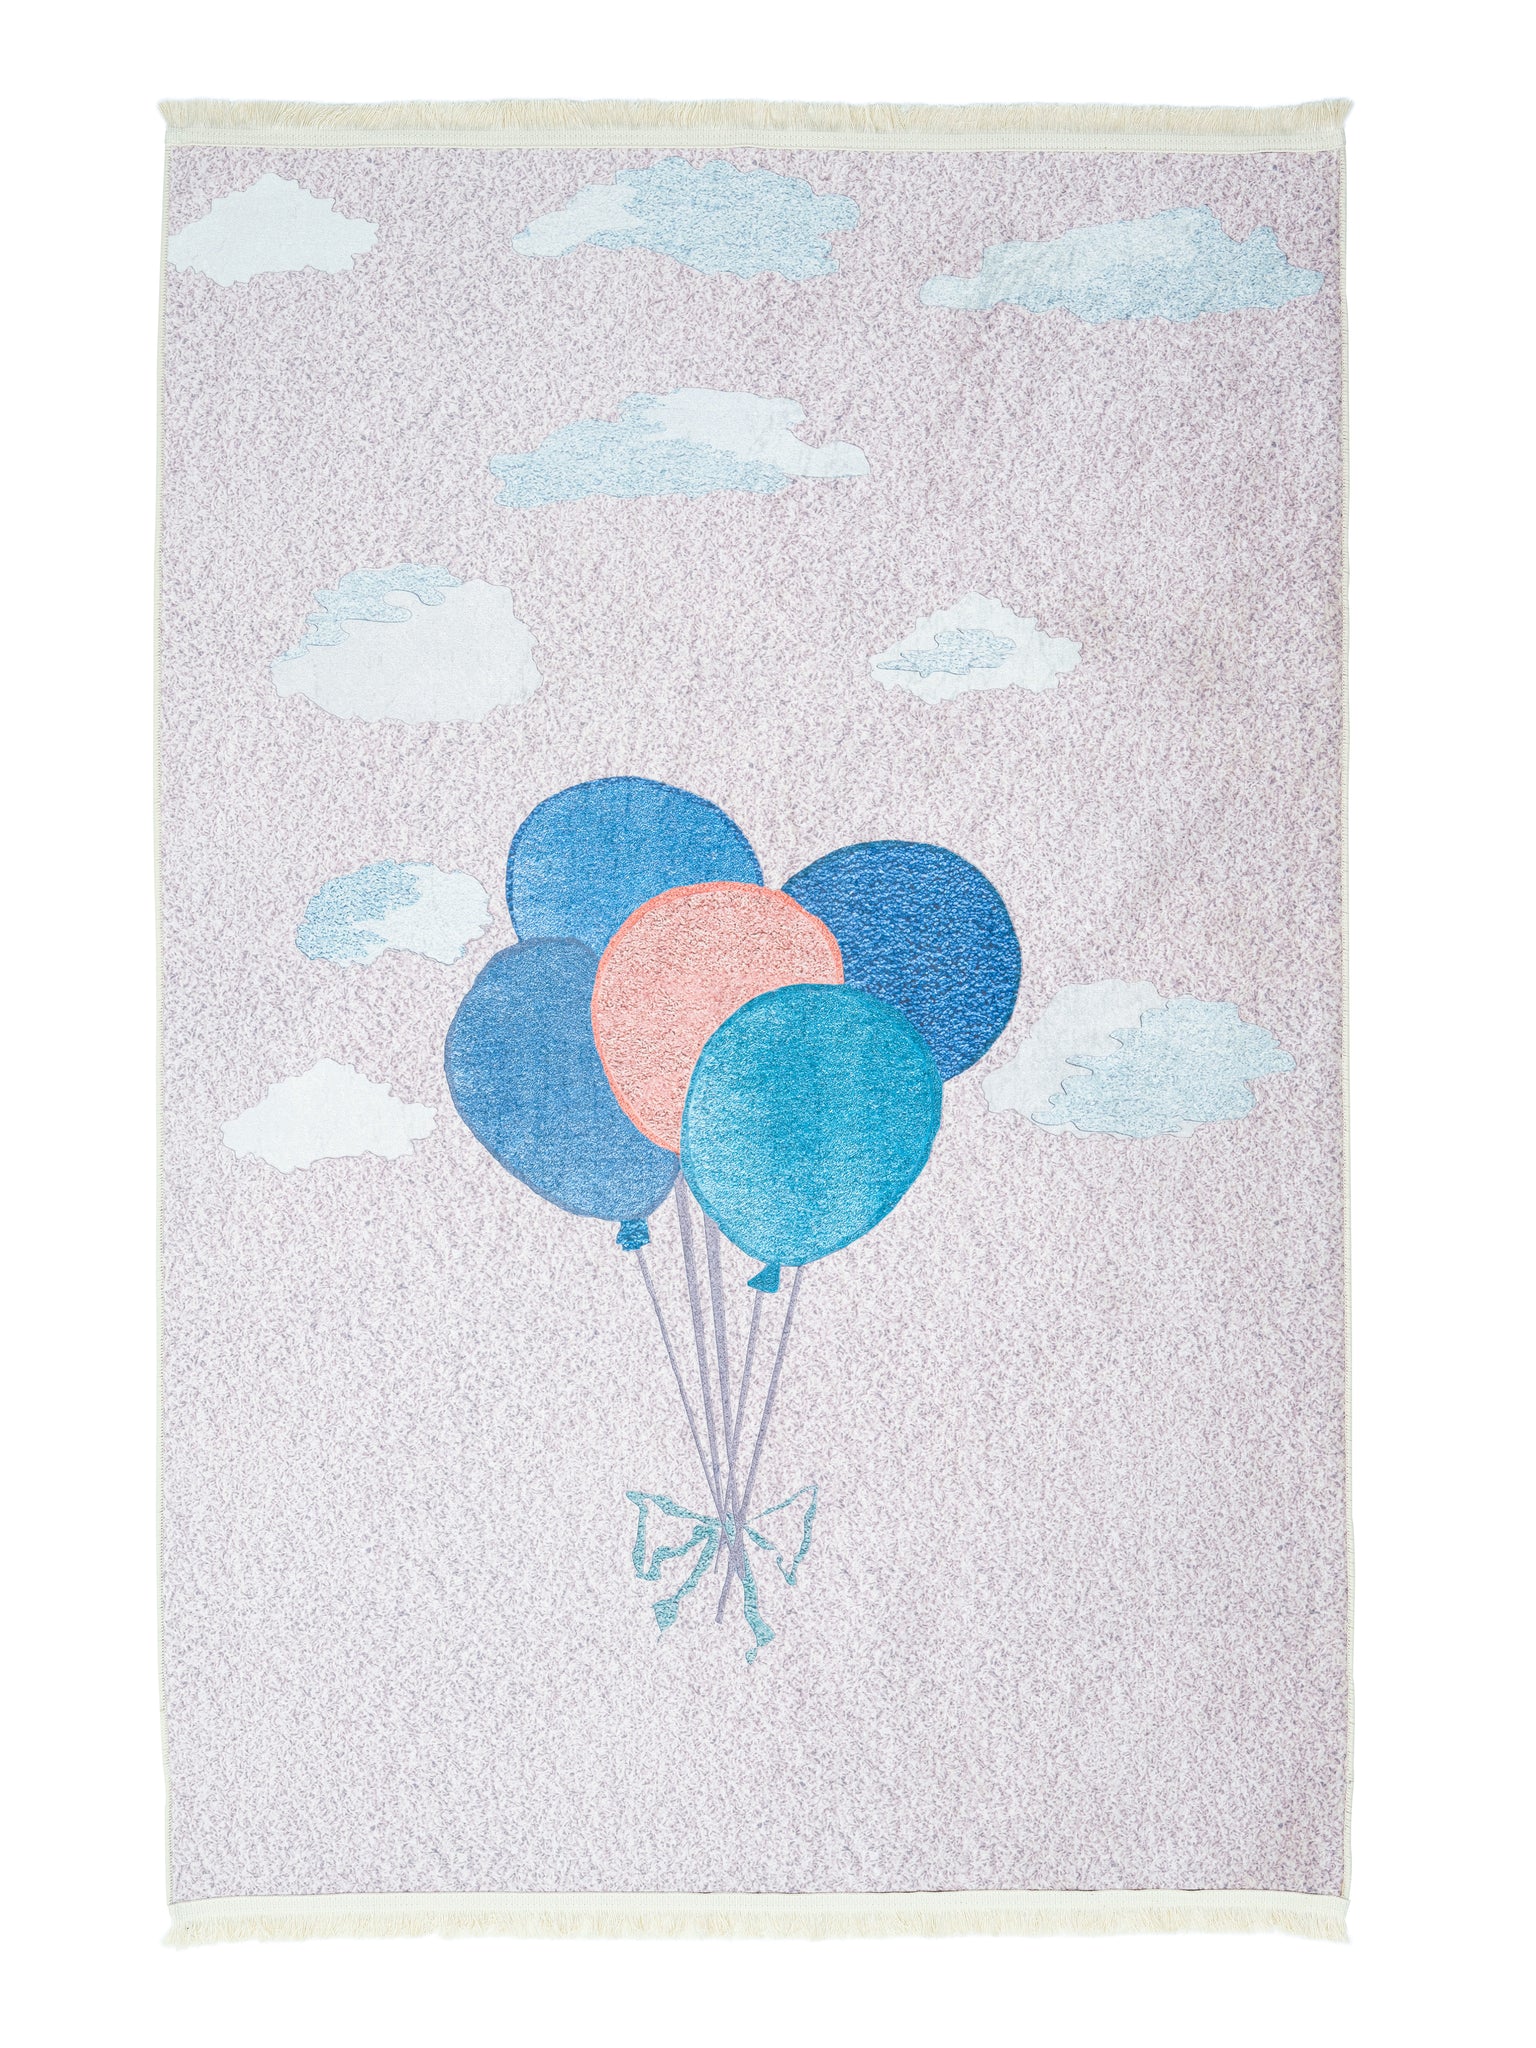 Rugaroos Balloon Away Kid's Machine Washable Play Rug | A Pink & Blue Balloons on Neutral backdrop | 4x6 | Mother Ruggers | Washable Rugs | Kid's Rugs | Eco Friendly Rug| Pet Friendly | Kid Friendly | Machine Wash | Line Dry | Bedroom | High-Traffic | Two-year warranty with proper care | Shake or light Vacuum | Machine Wash as needed | Dry Flat or Line Dry | Dries fast | Hand Drawn - Digitally Printed | Velvet | Easy- Clean 